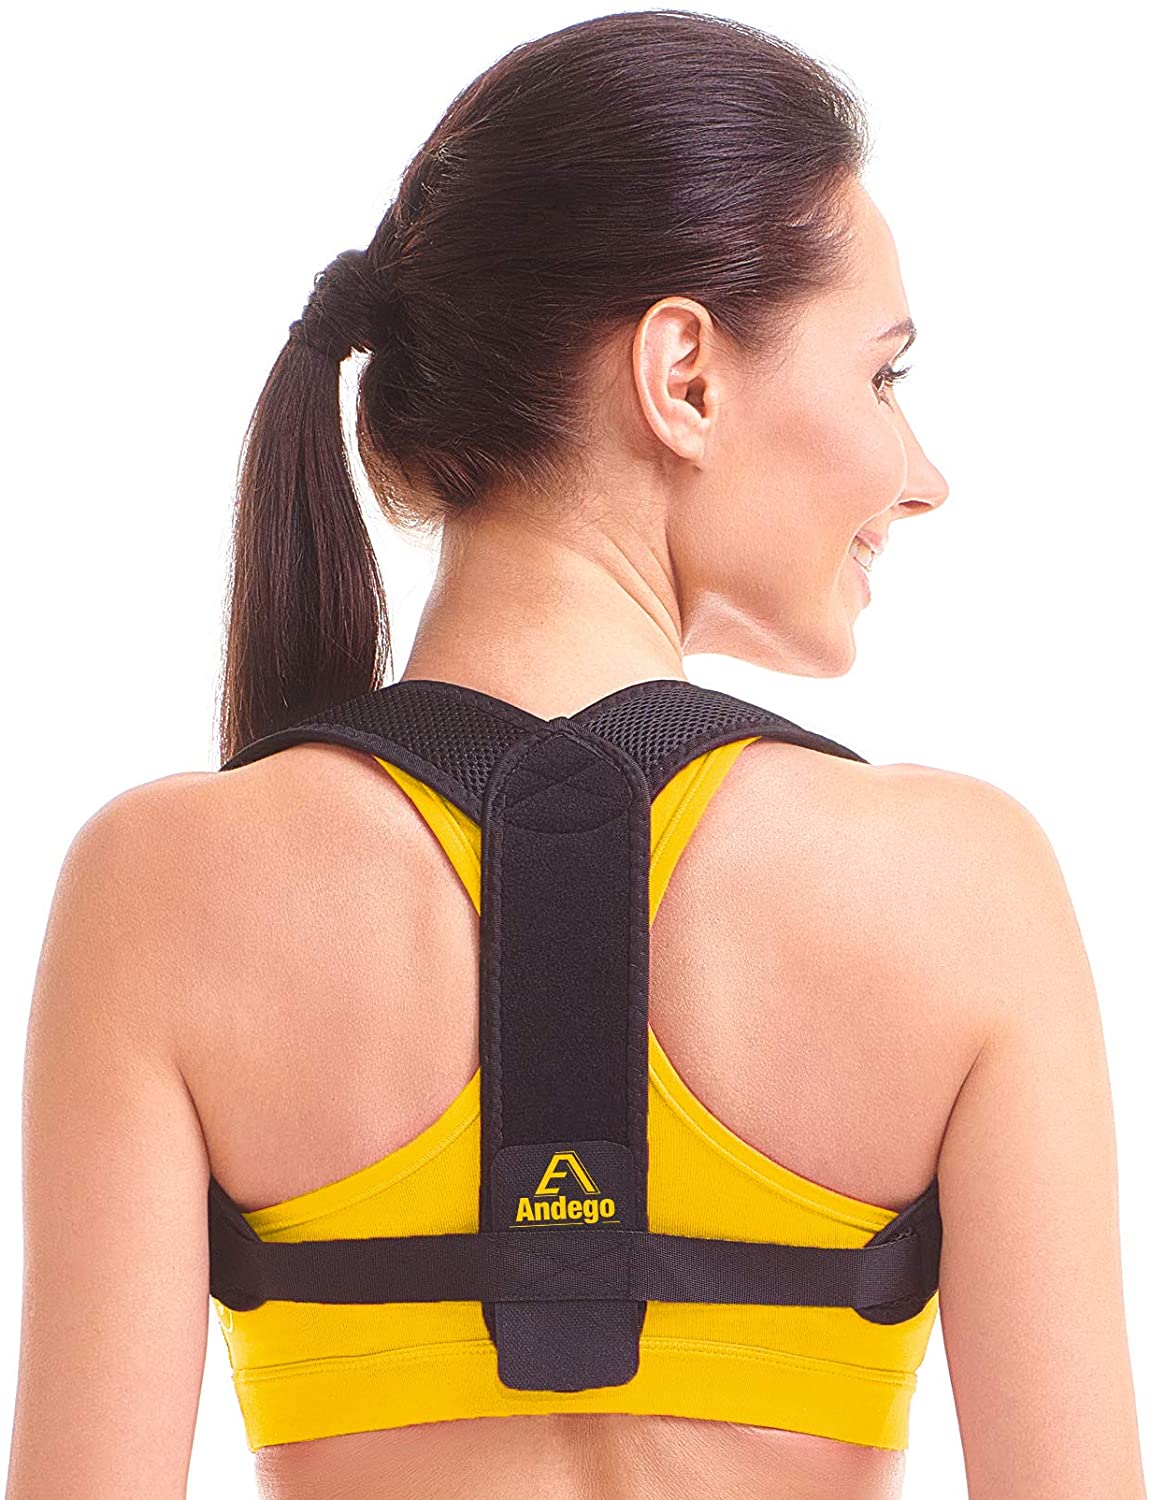 ANDEGO - Back Brace Posture Corrector Women Men - Posture Corrector for Back Support - Effective Posture Brace, Prevents Slouching - One Size Fits All - e4cents